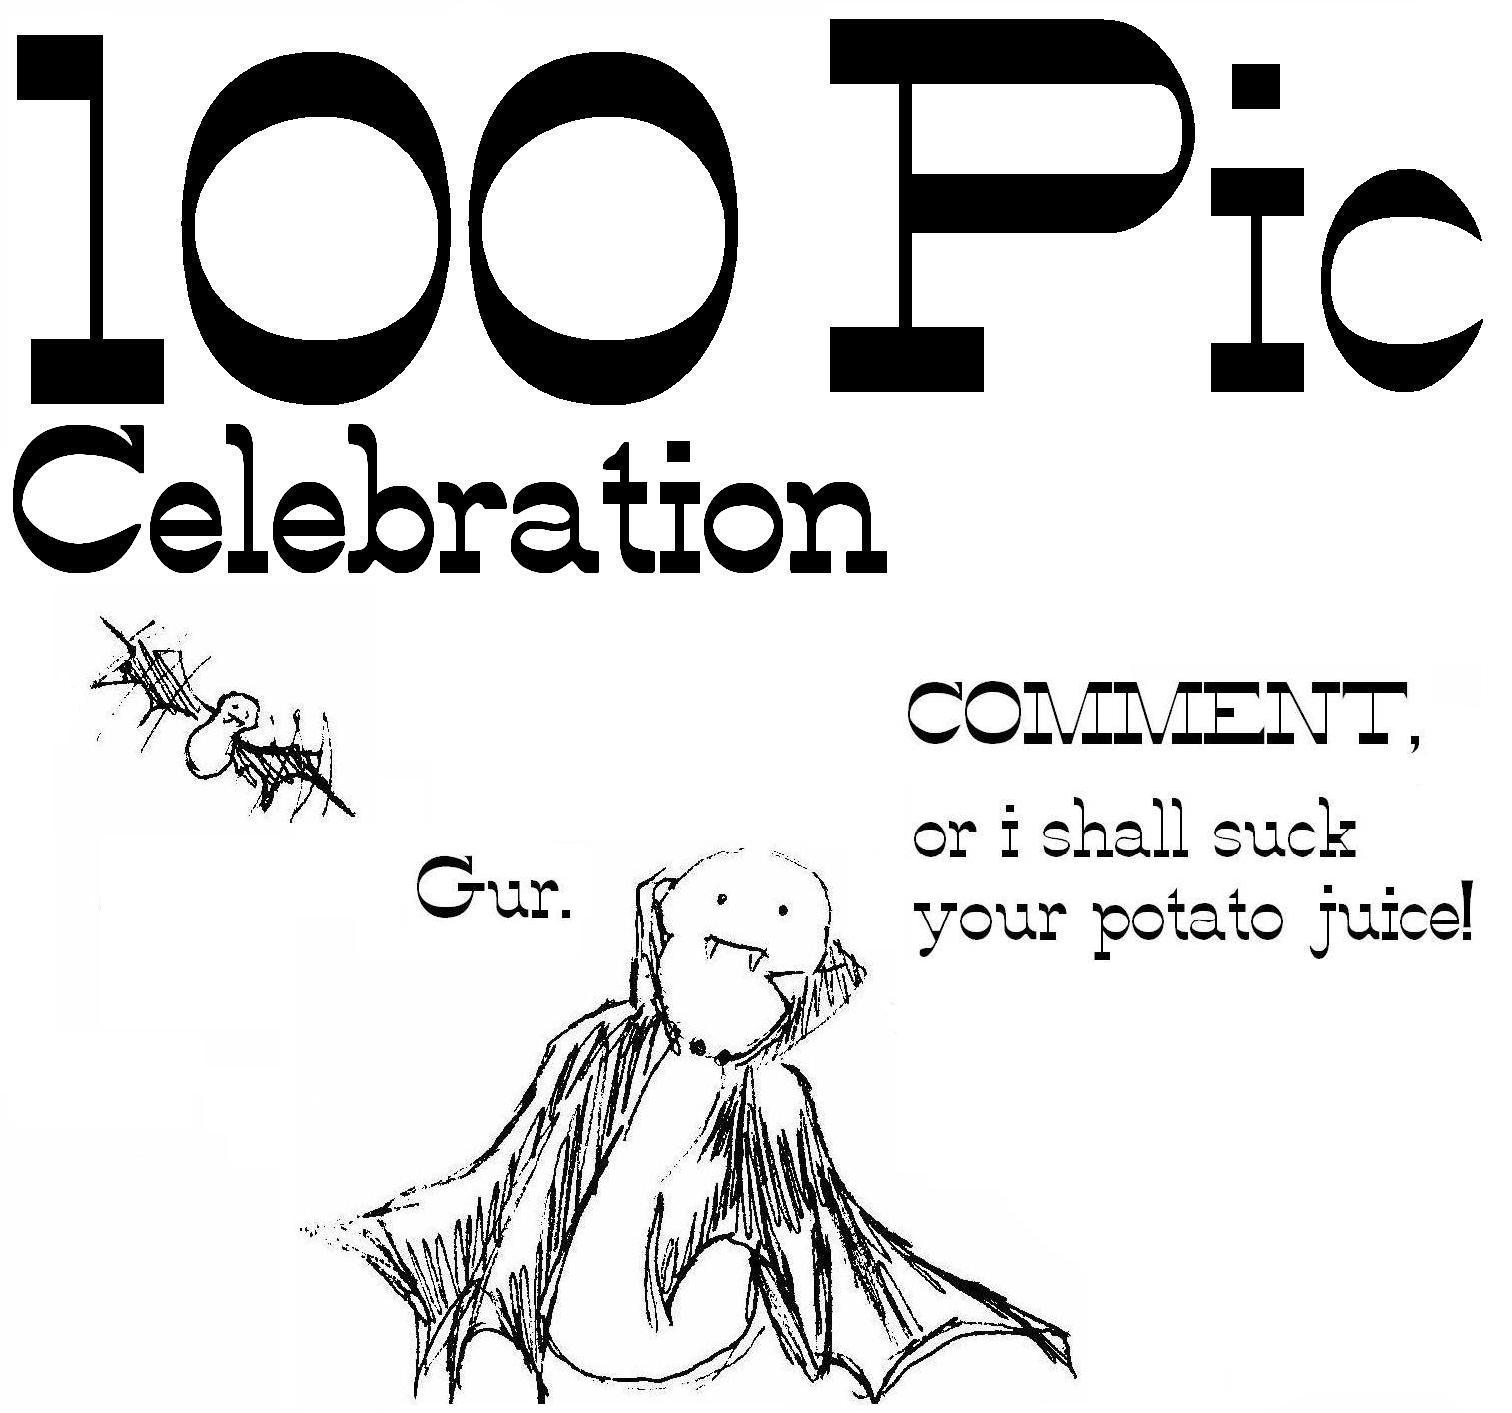 100 pic celebration! by Tore